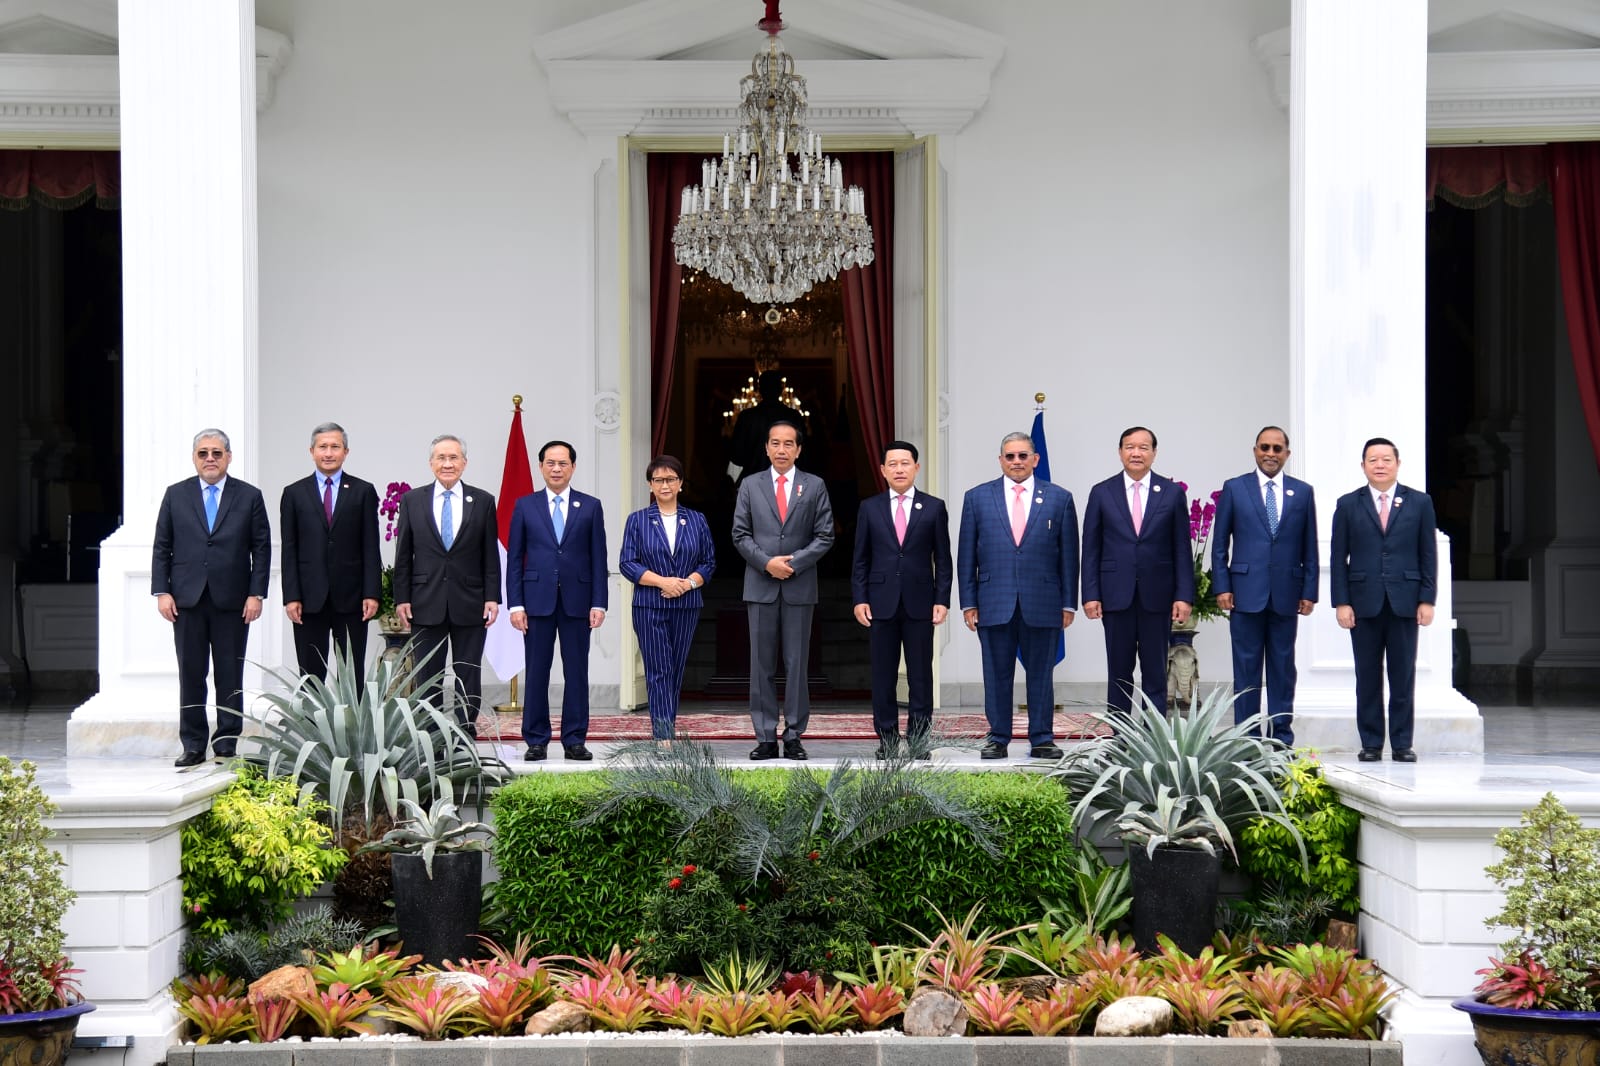 President Jokowi Welcomes ASEAN Foreign Ministers at Merdeka Palace